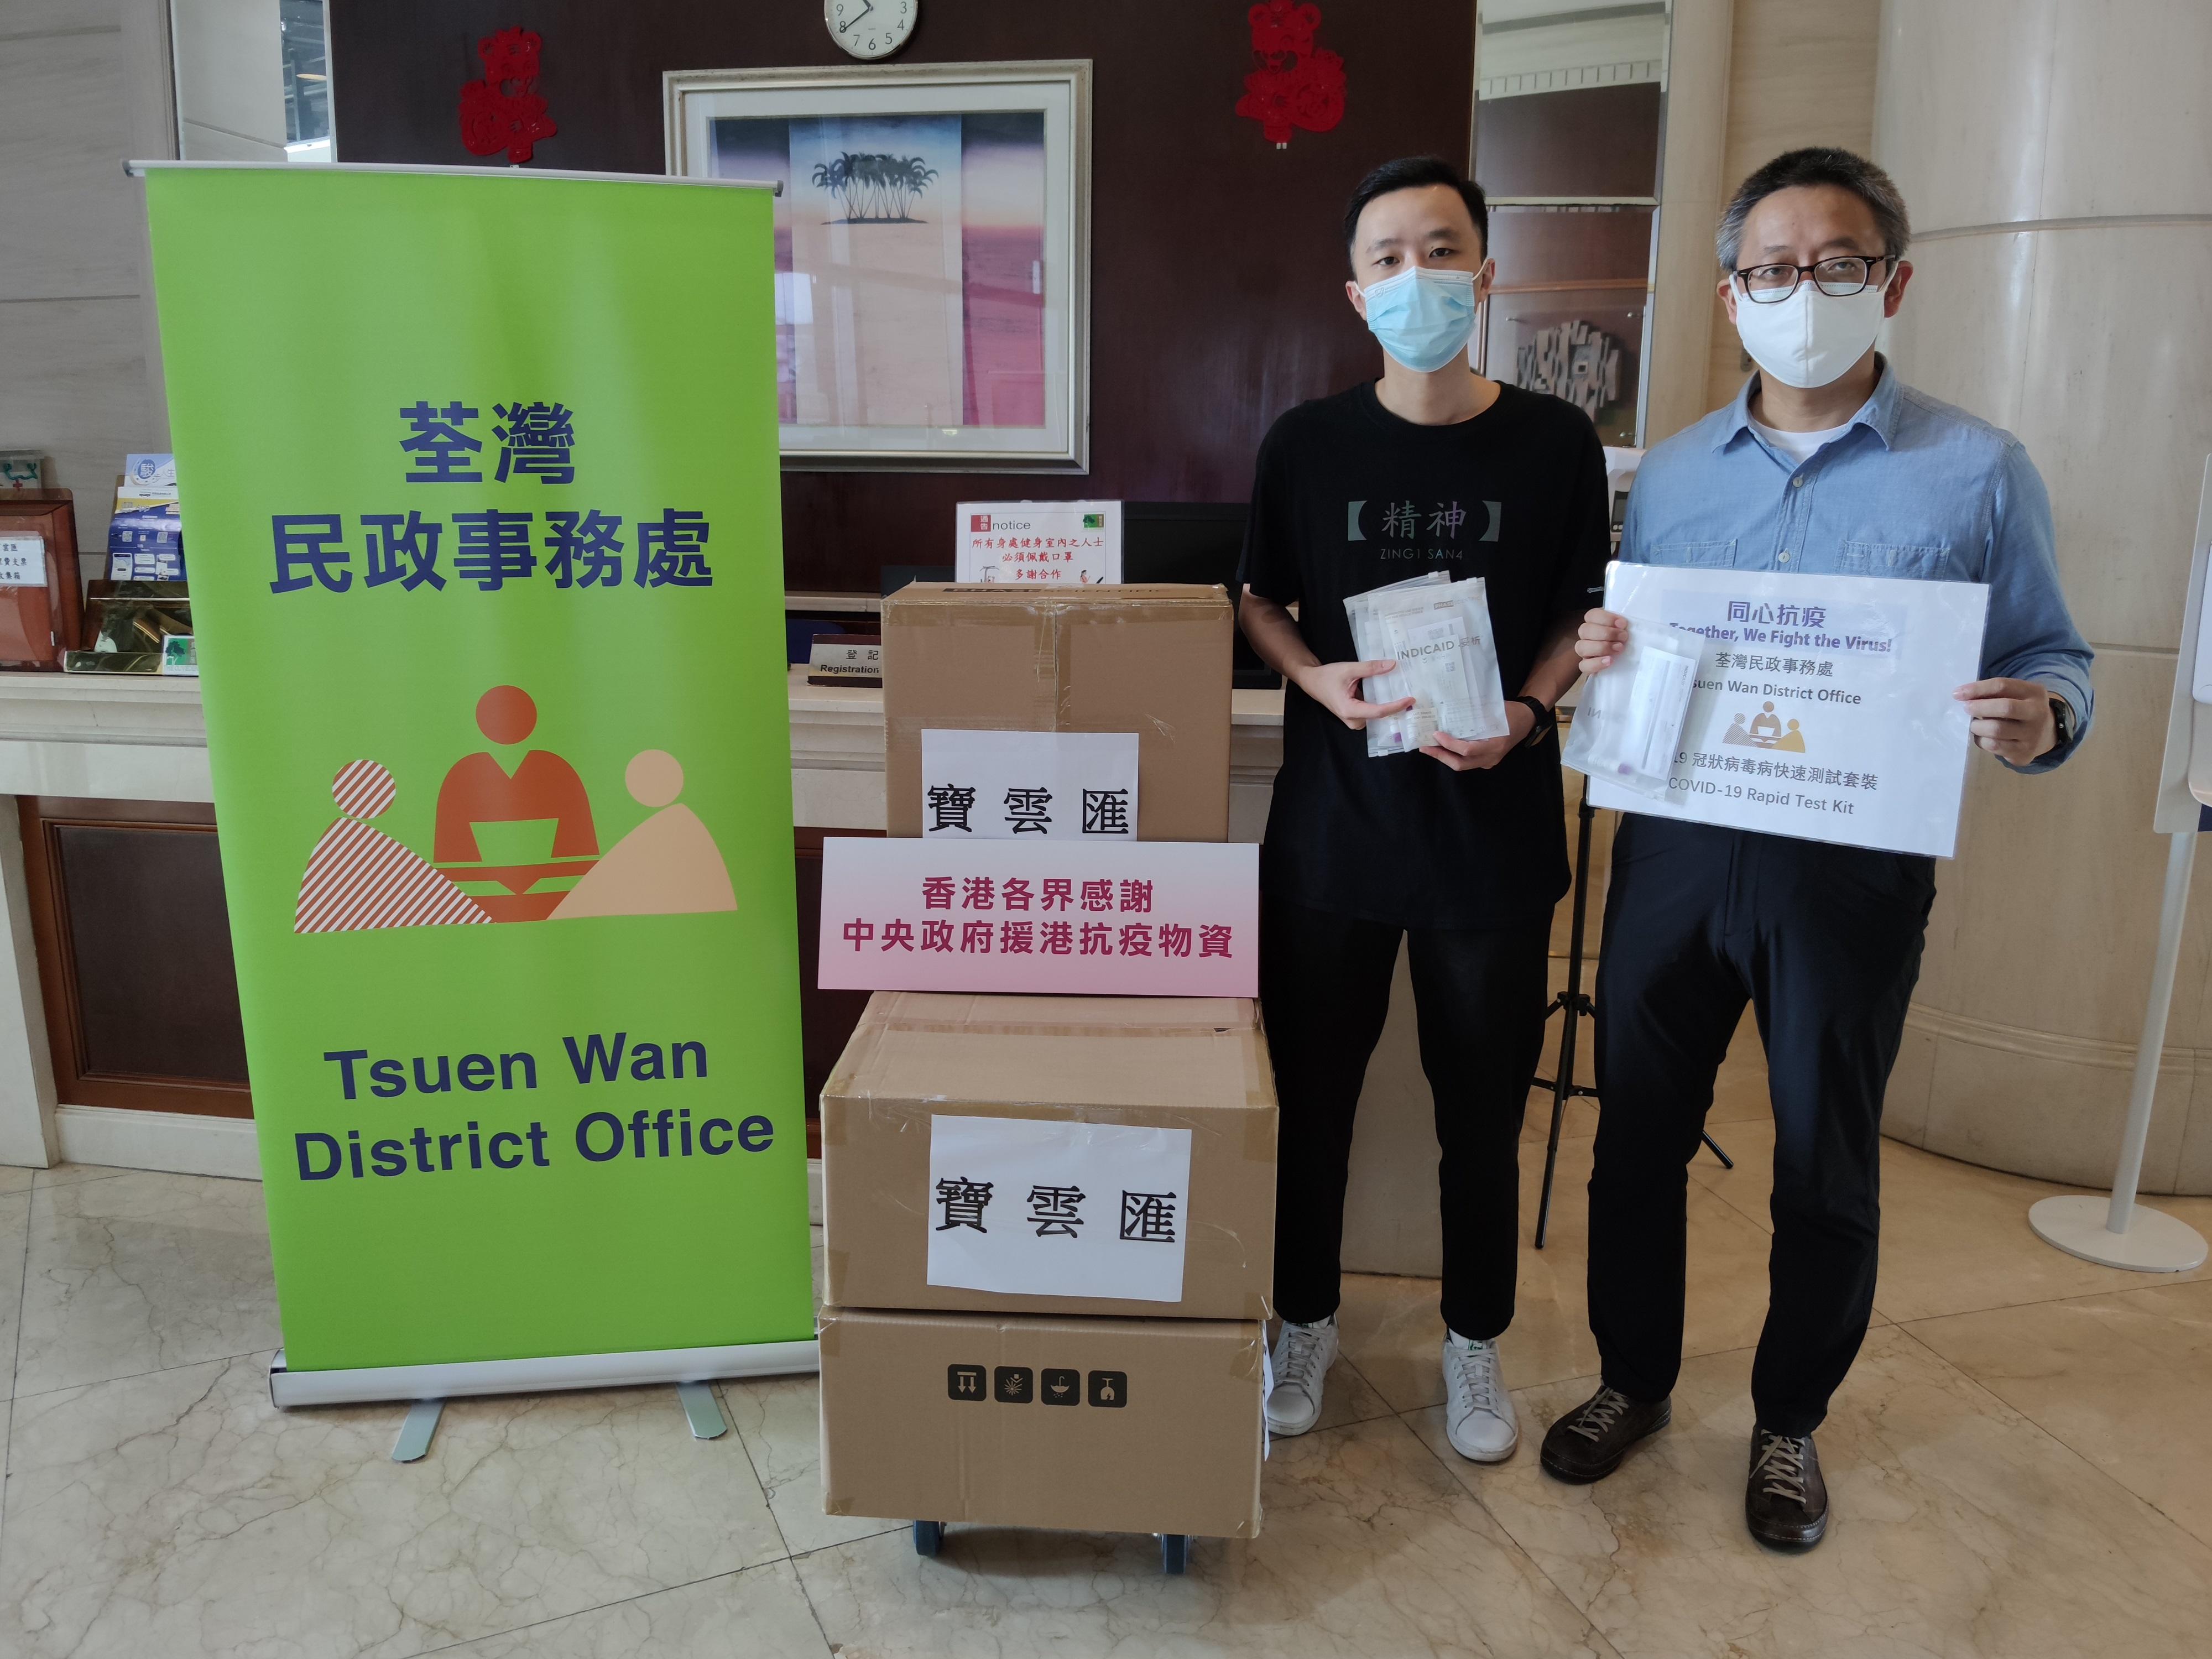 The Tsuen Wan District Office today (April 30) distributed COVID-19 rapid test kits to households, cleansing workers and property management staff living and working in The Cliveden for voluntary testing through the property management company.